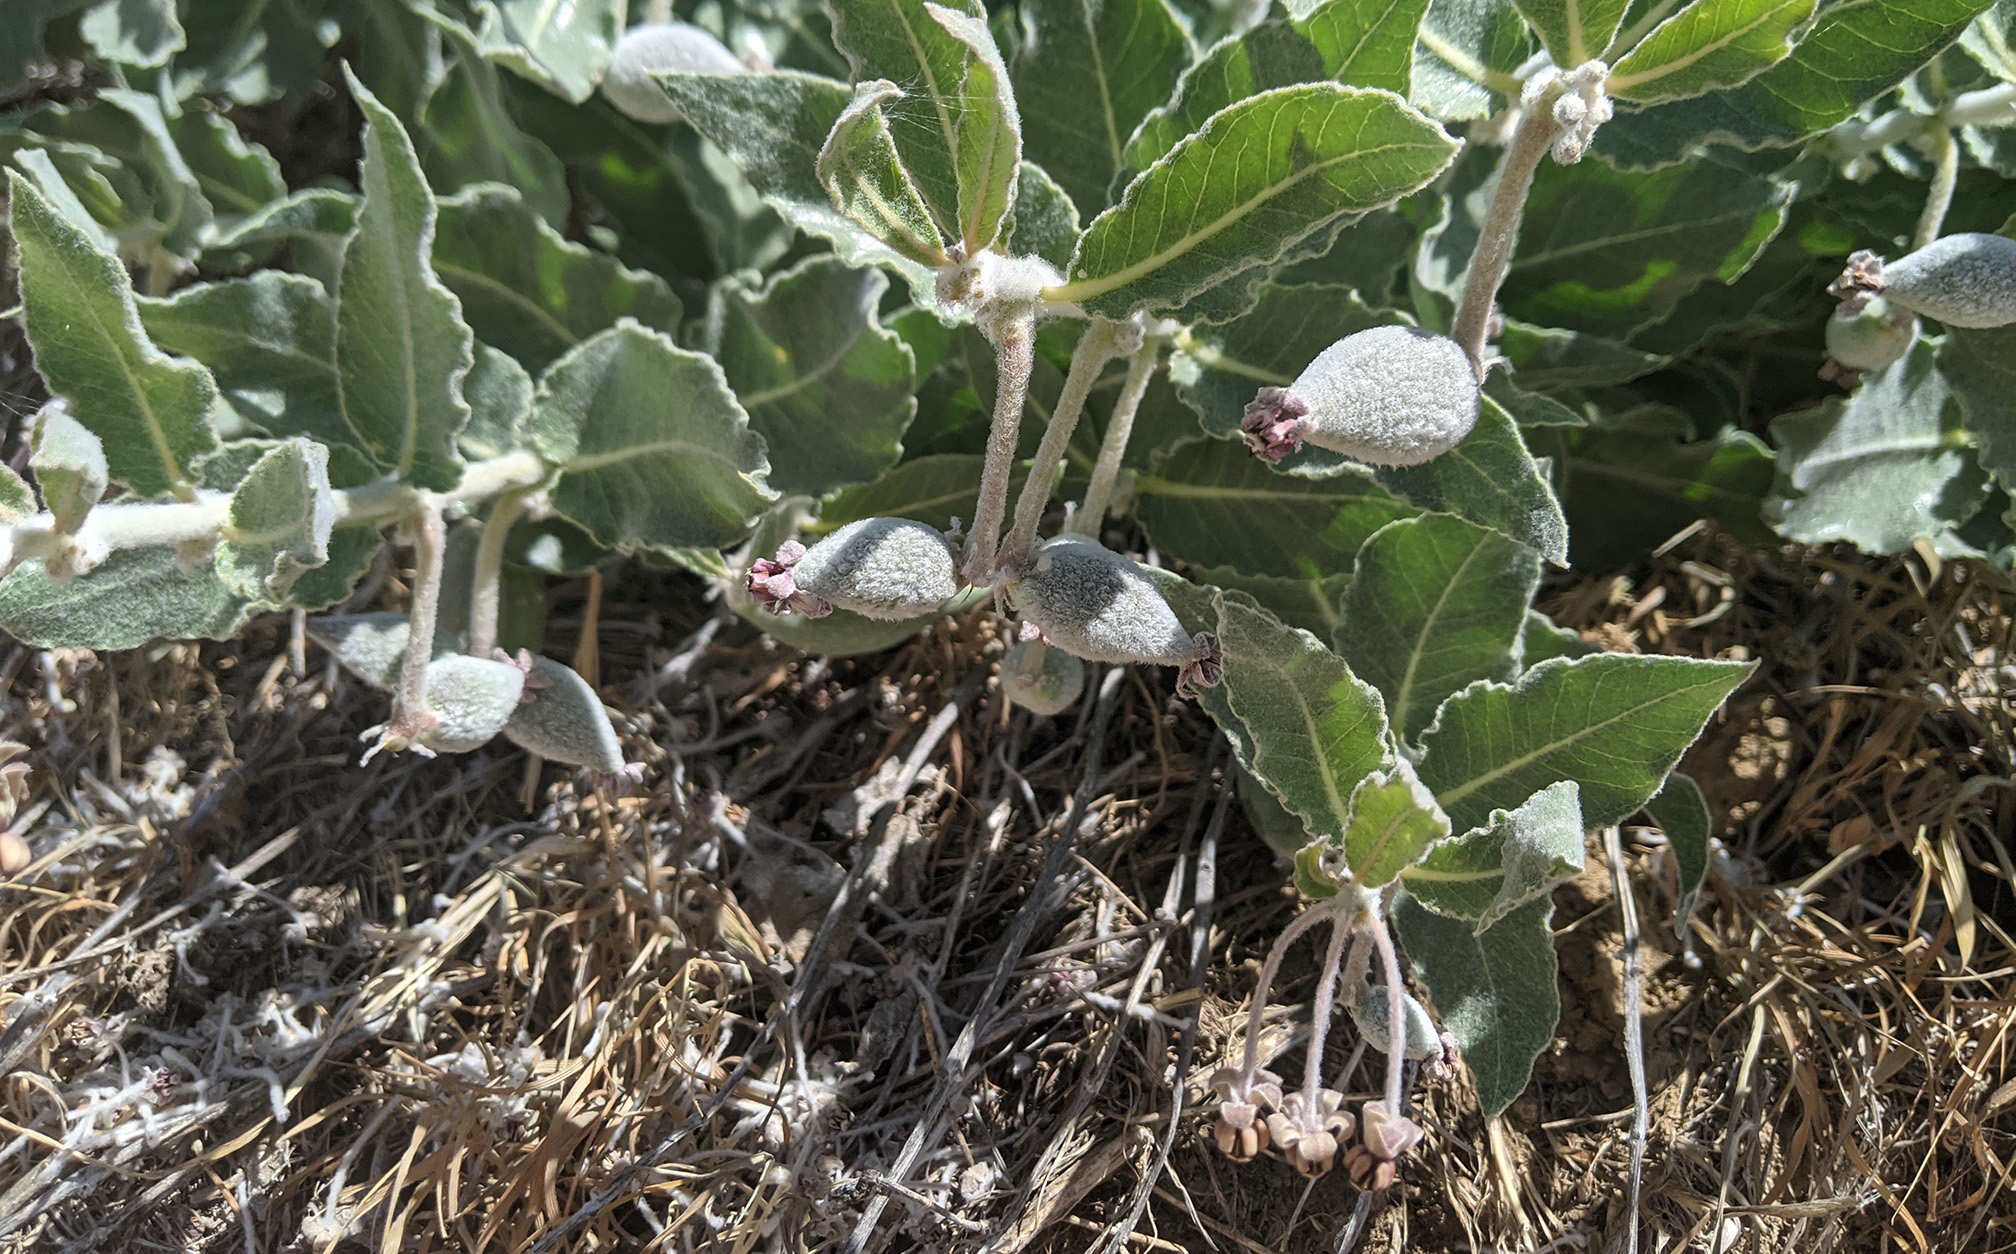 A close up photo of a group of California milkweed plants. The plants are short. The leaves are long with a wavy edge and pointed tip. They are gray-green in color and covered with pale downy hair. Fat seed pods the shape of a football are forming on the stems.